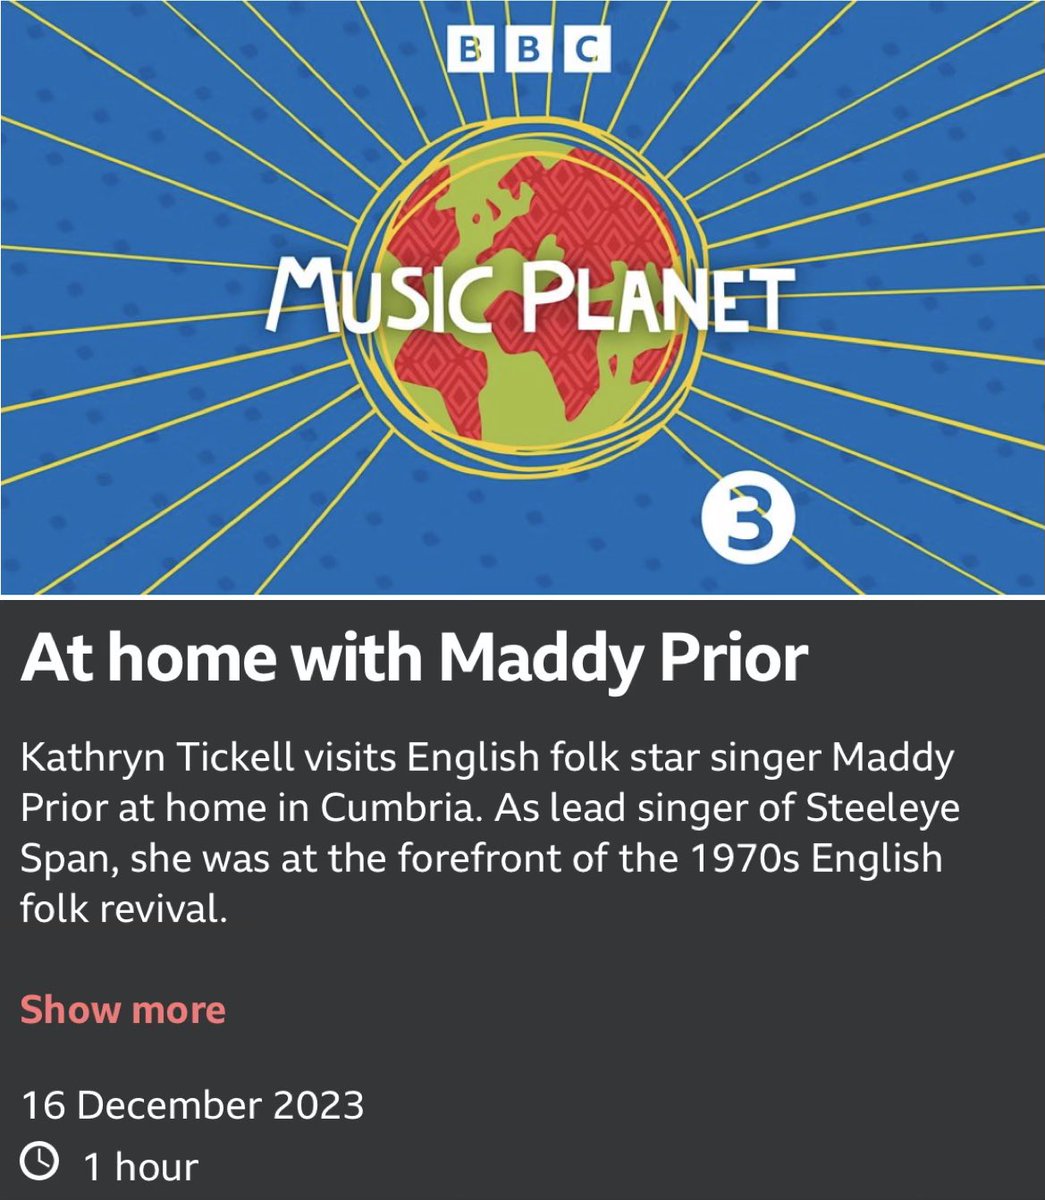 At home with Maddy Prior This Saturday 16th December at 16:00 @BBCRadio3 @kathryntickell visits English folk star singer @MaddyPriorFolk at home in Cumbria. bbc.co.uk/programmes/b09…